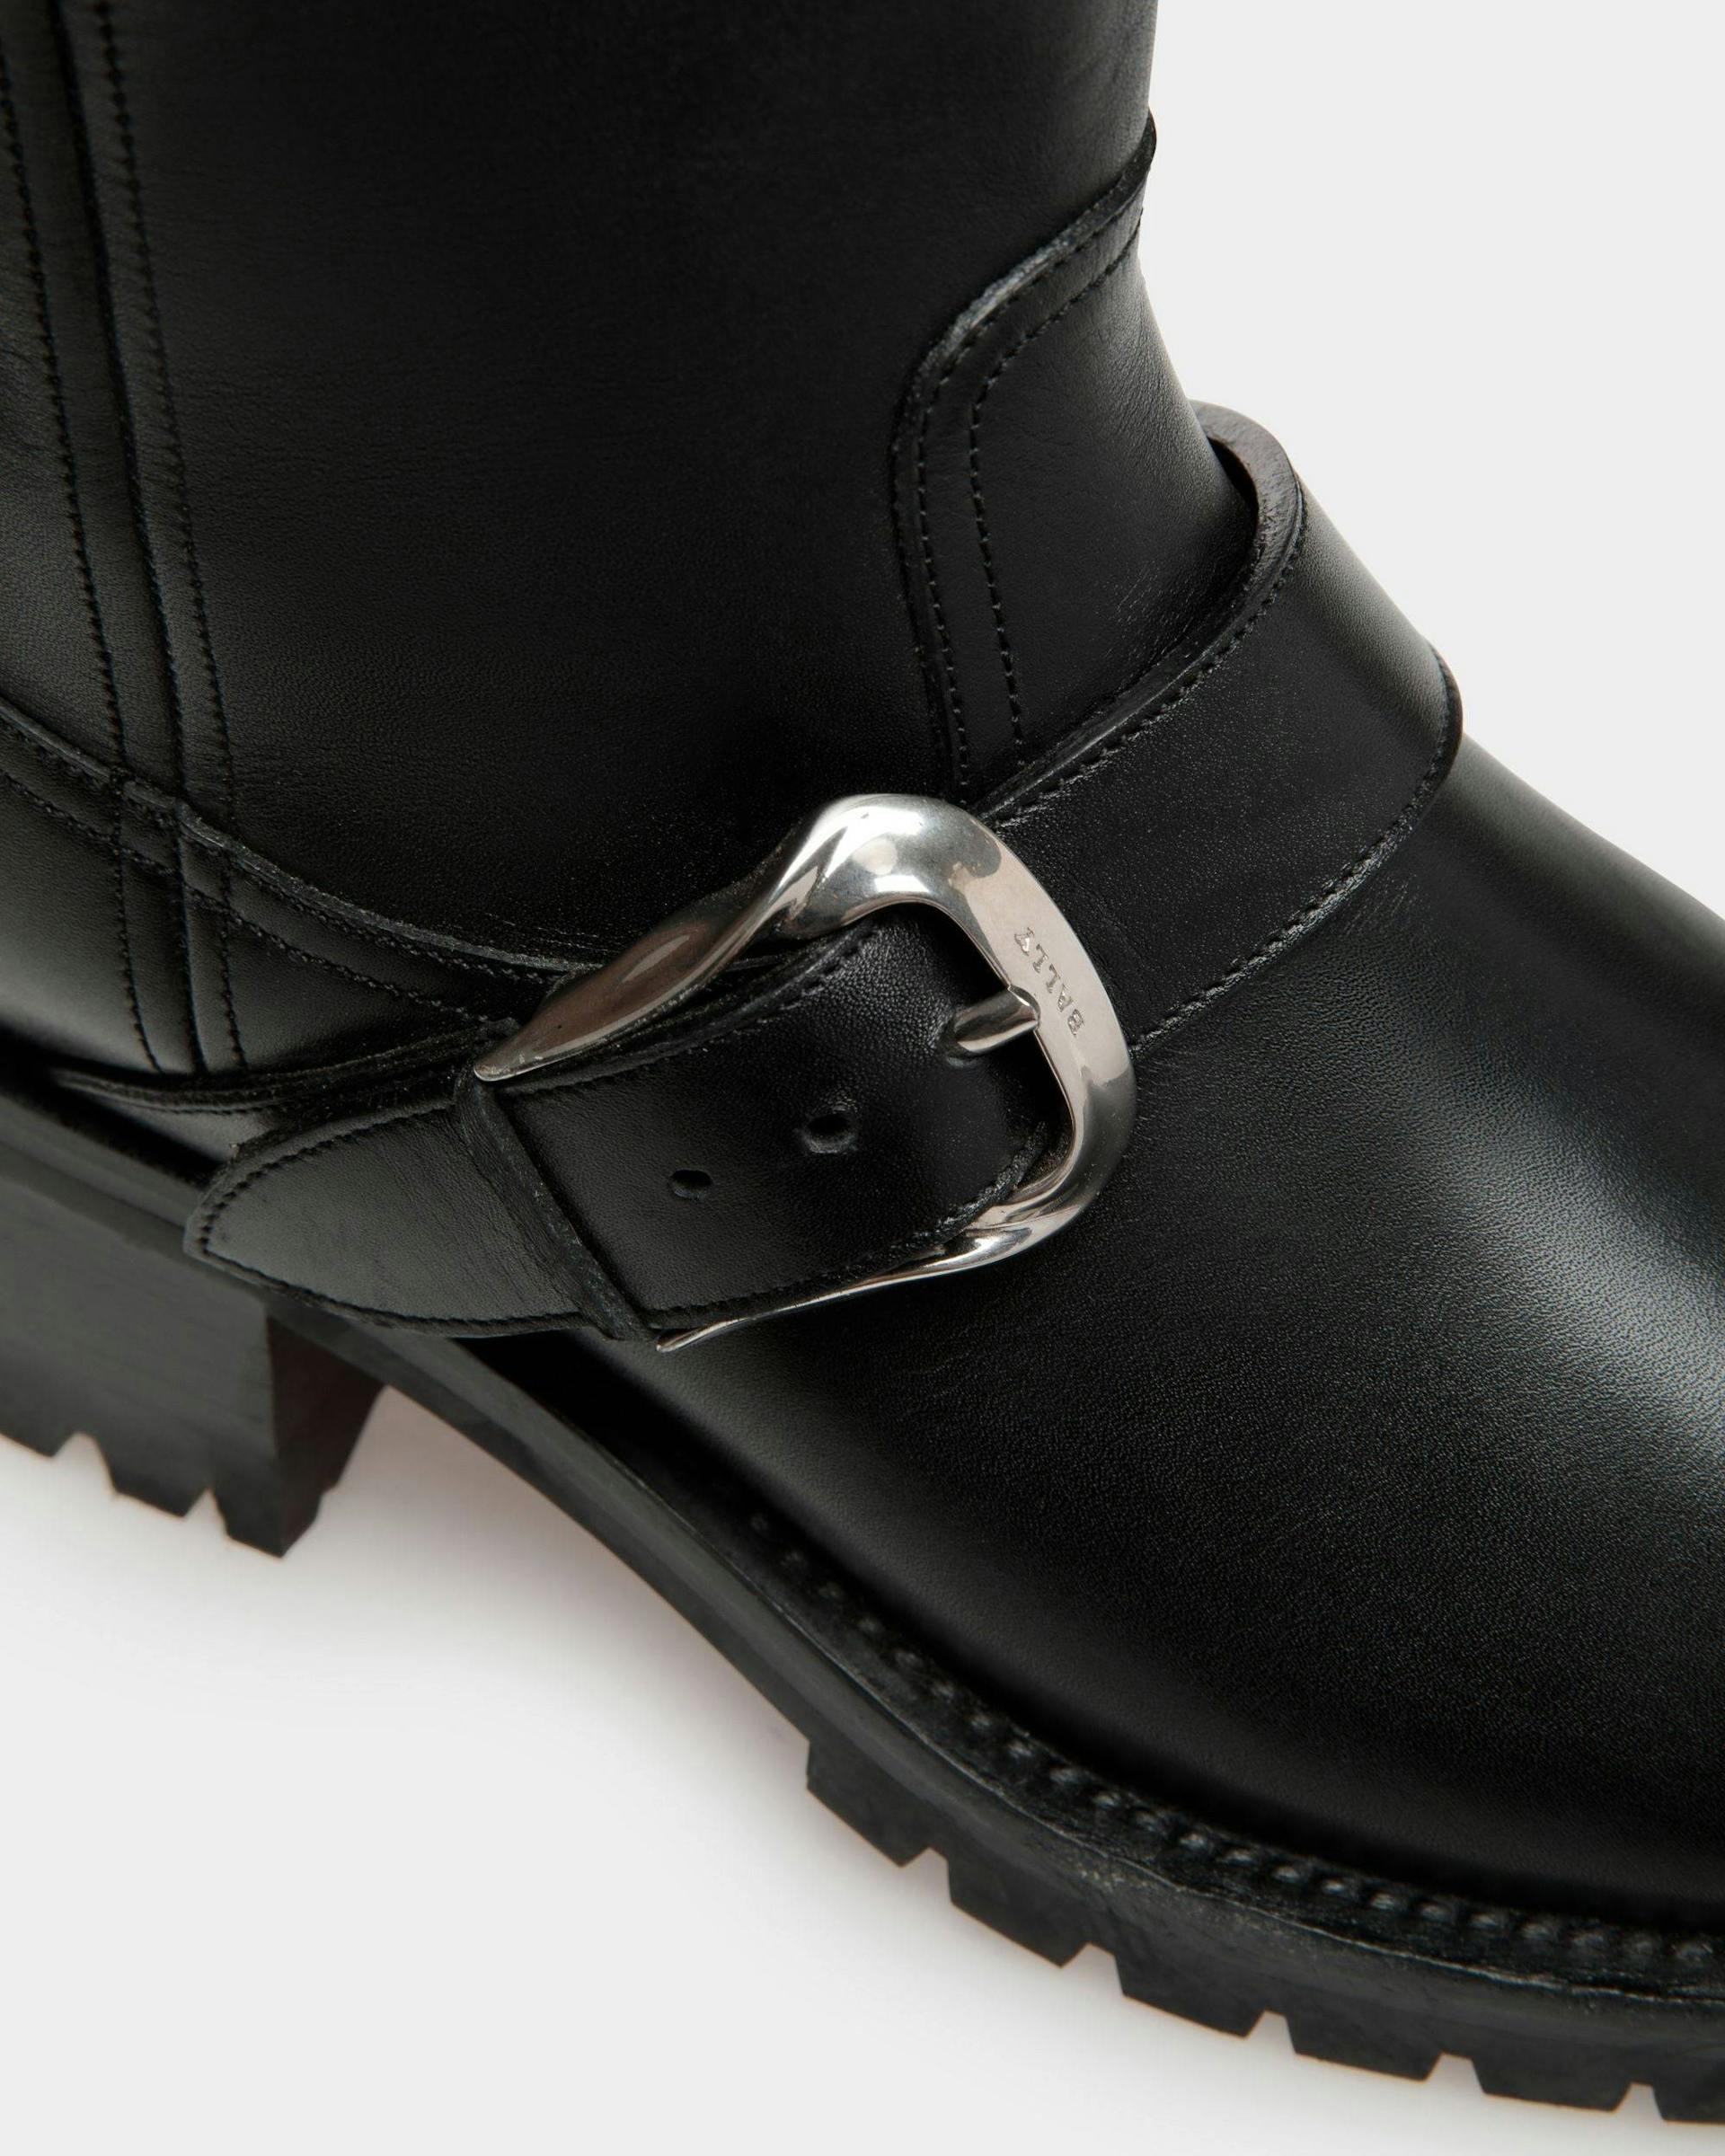 Women's Ardis Long Boots In Black Leather | Bally | Still Life Detail